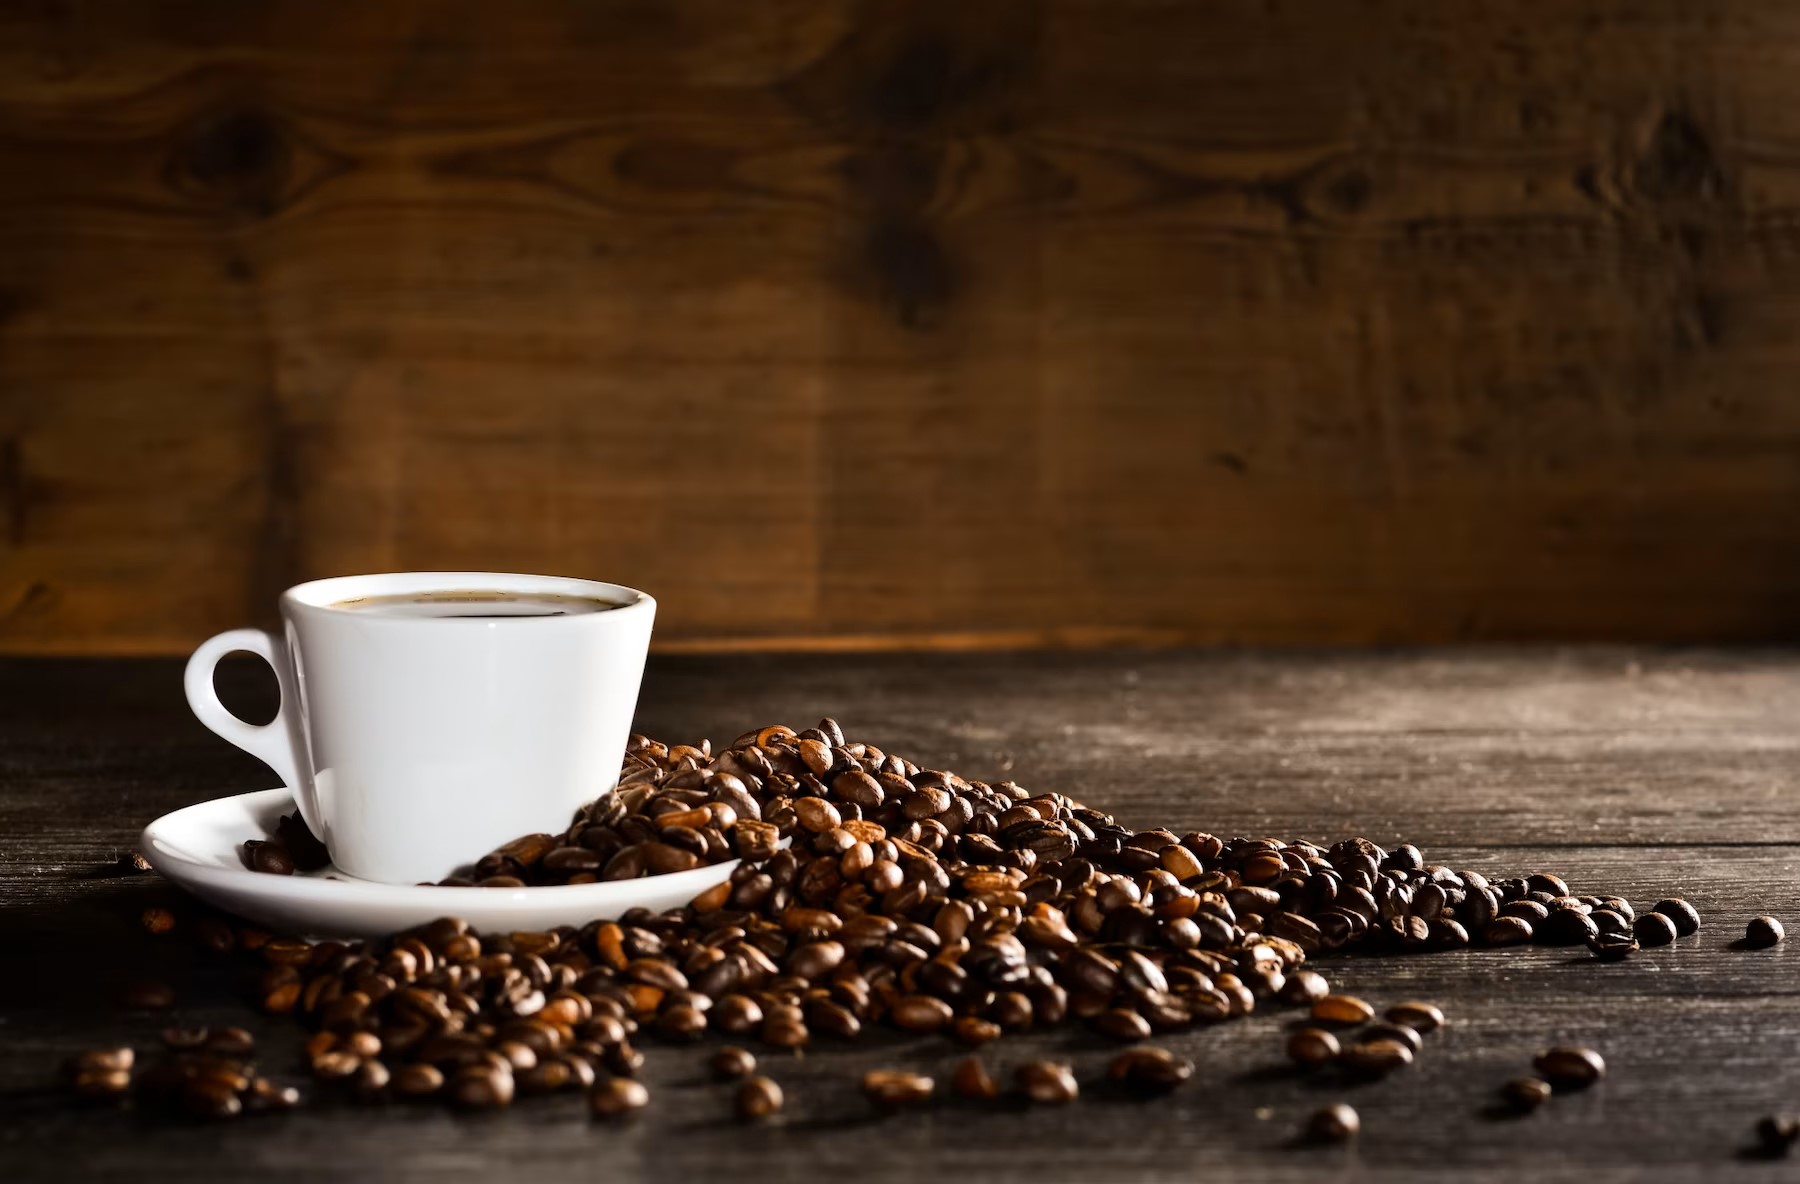 cup-of-coffee-with-a-pile-of-coffee-beans_1112-438.jpg